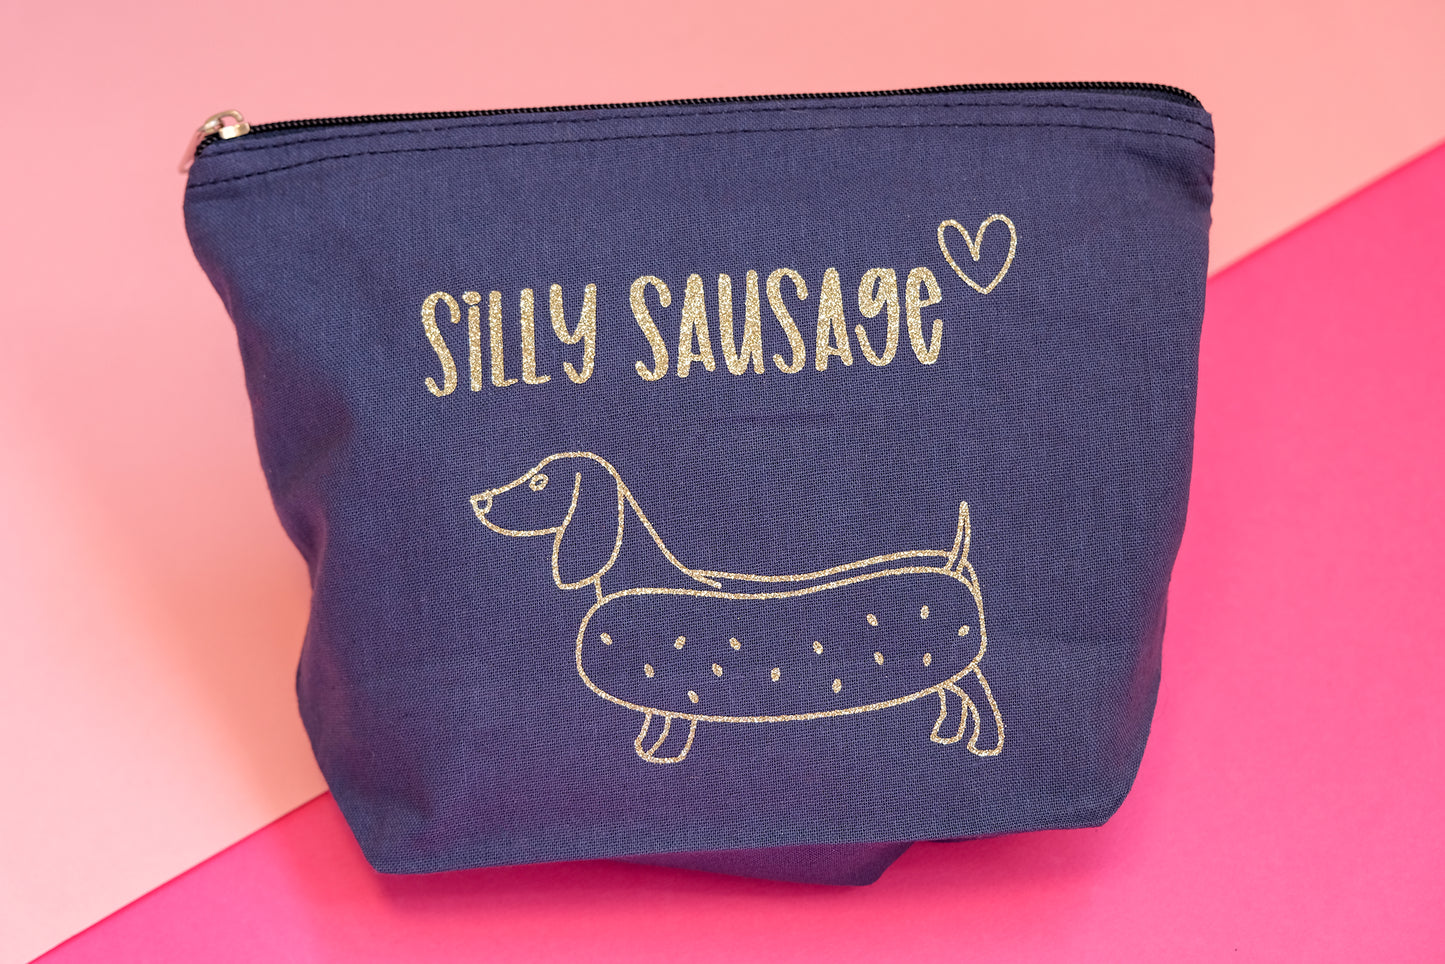 Silly Sausage cotton bag